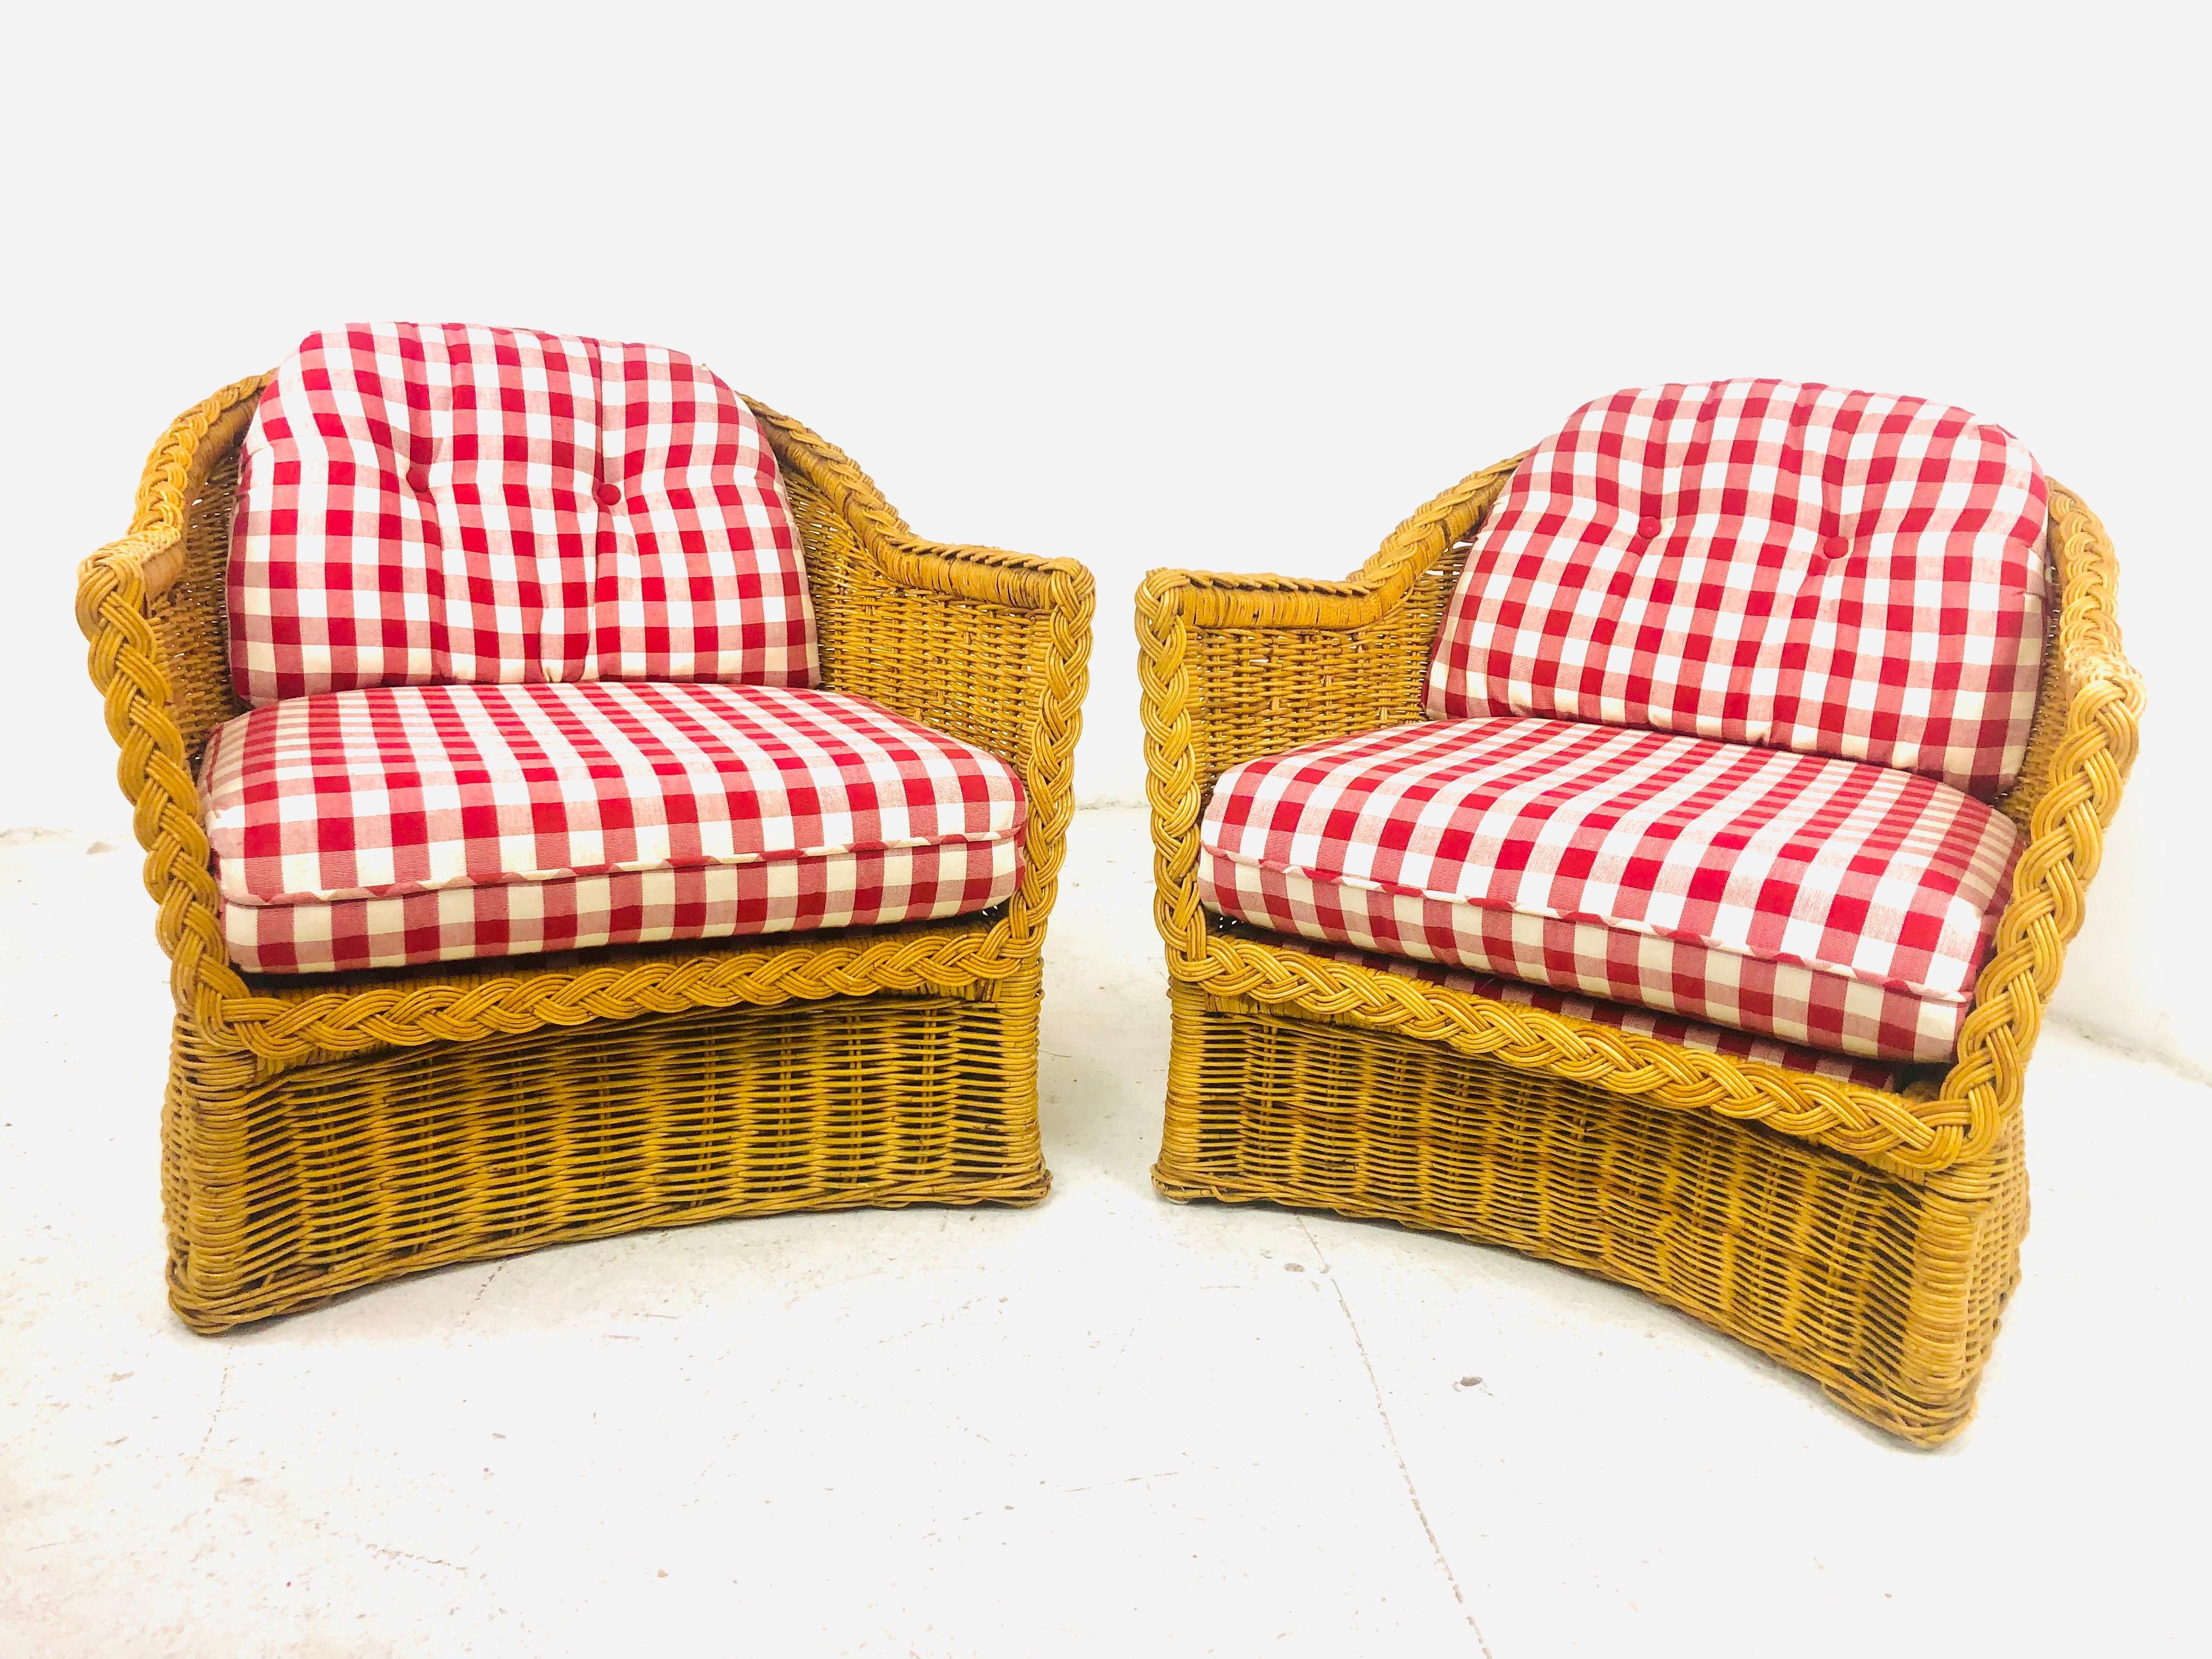 Late 20th Century Braided Rattan Living Room Set by Wicker Works